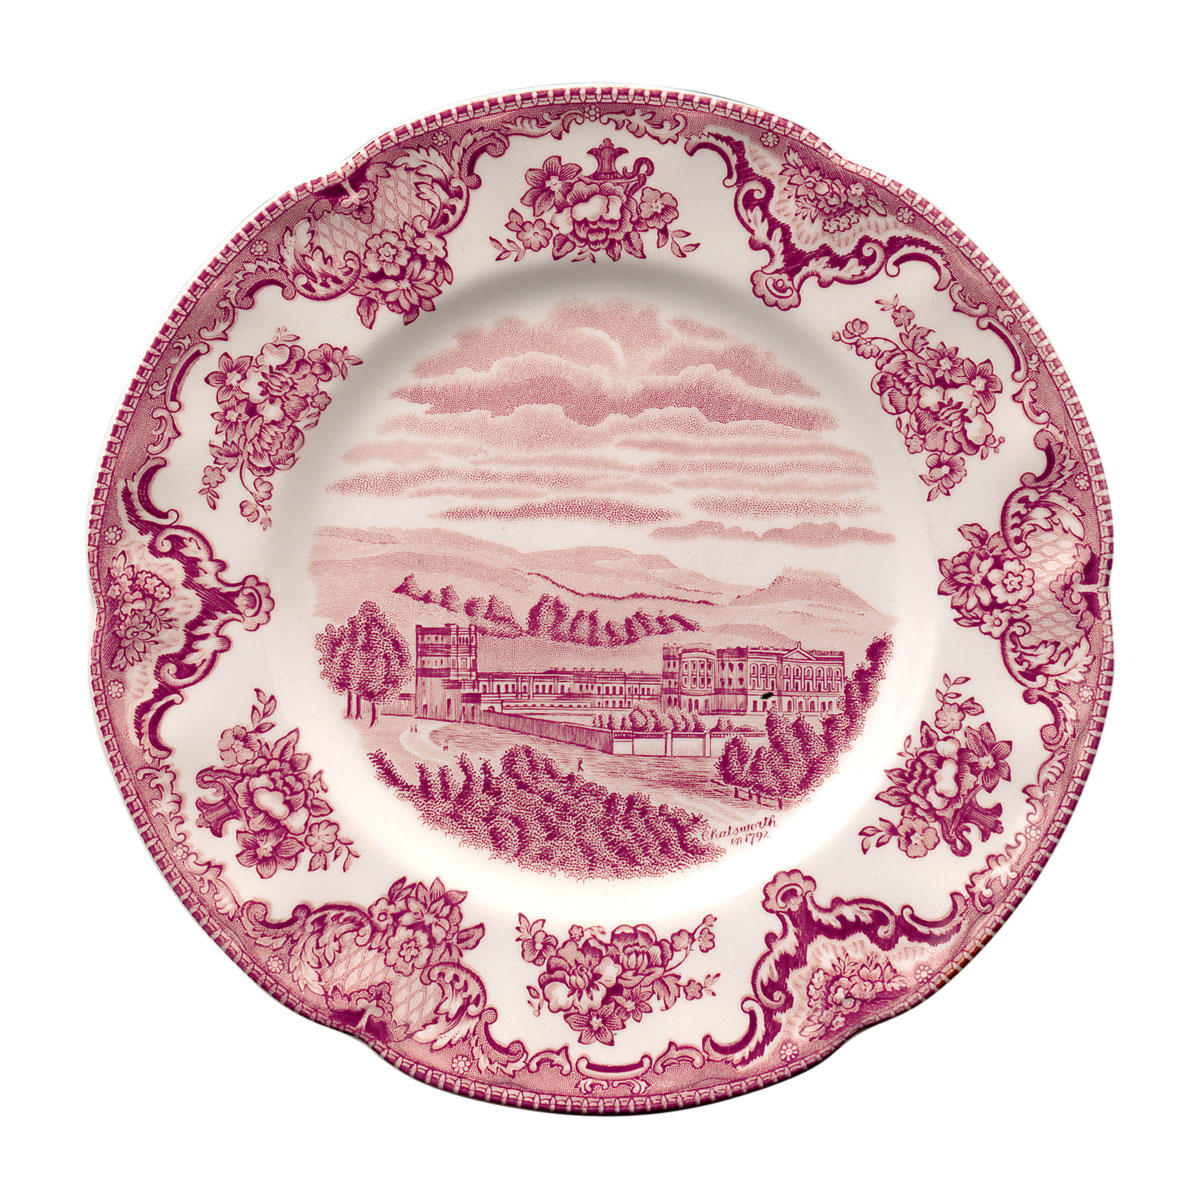 Johnson Brothers China Old Britain Castles Pink Salad Plate 8", Single